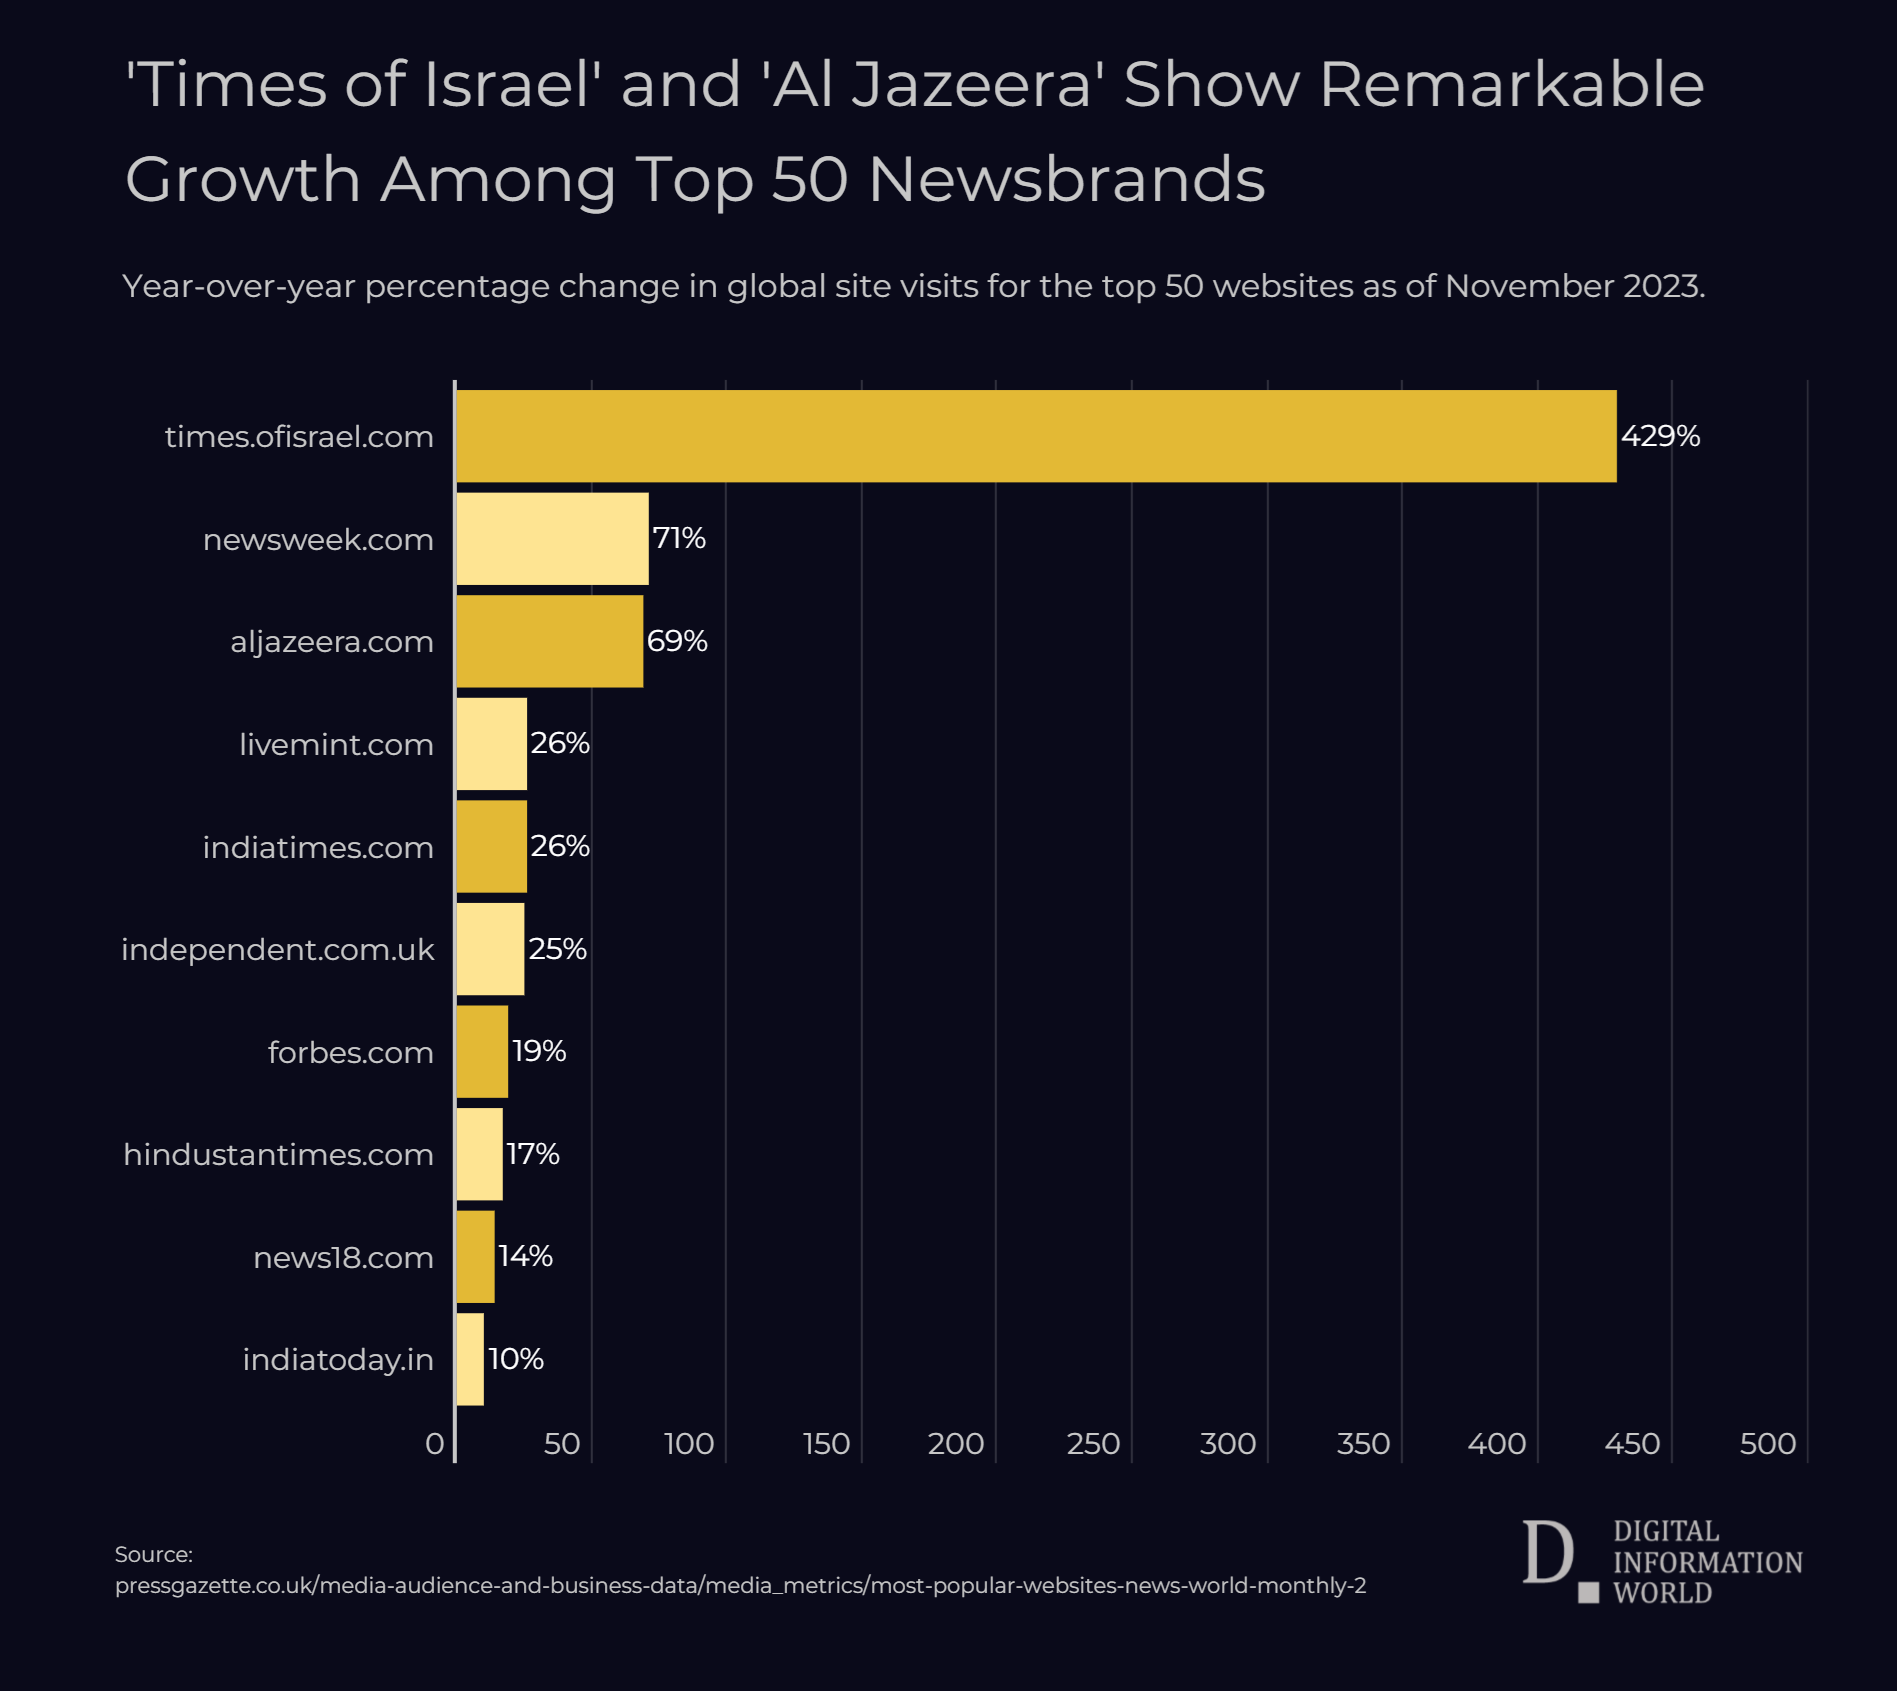 Times of Israel and Al Jazeera Outpace Peers in Growth Among Top 50 Newsbrands